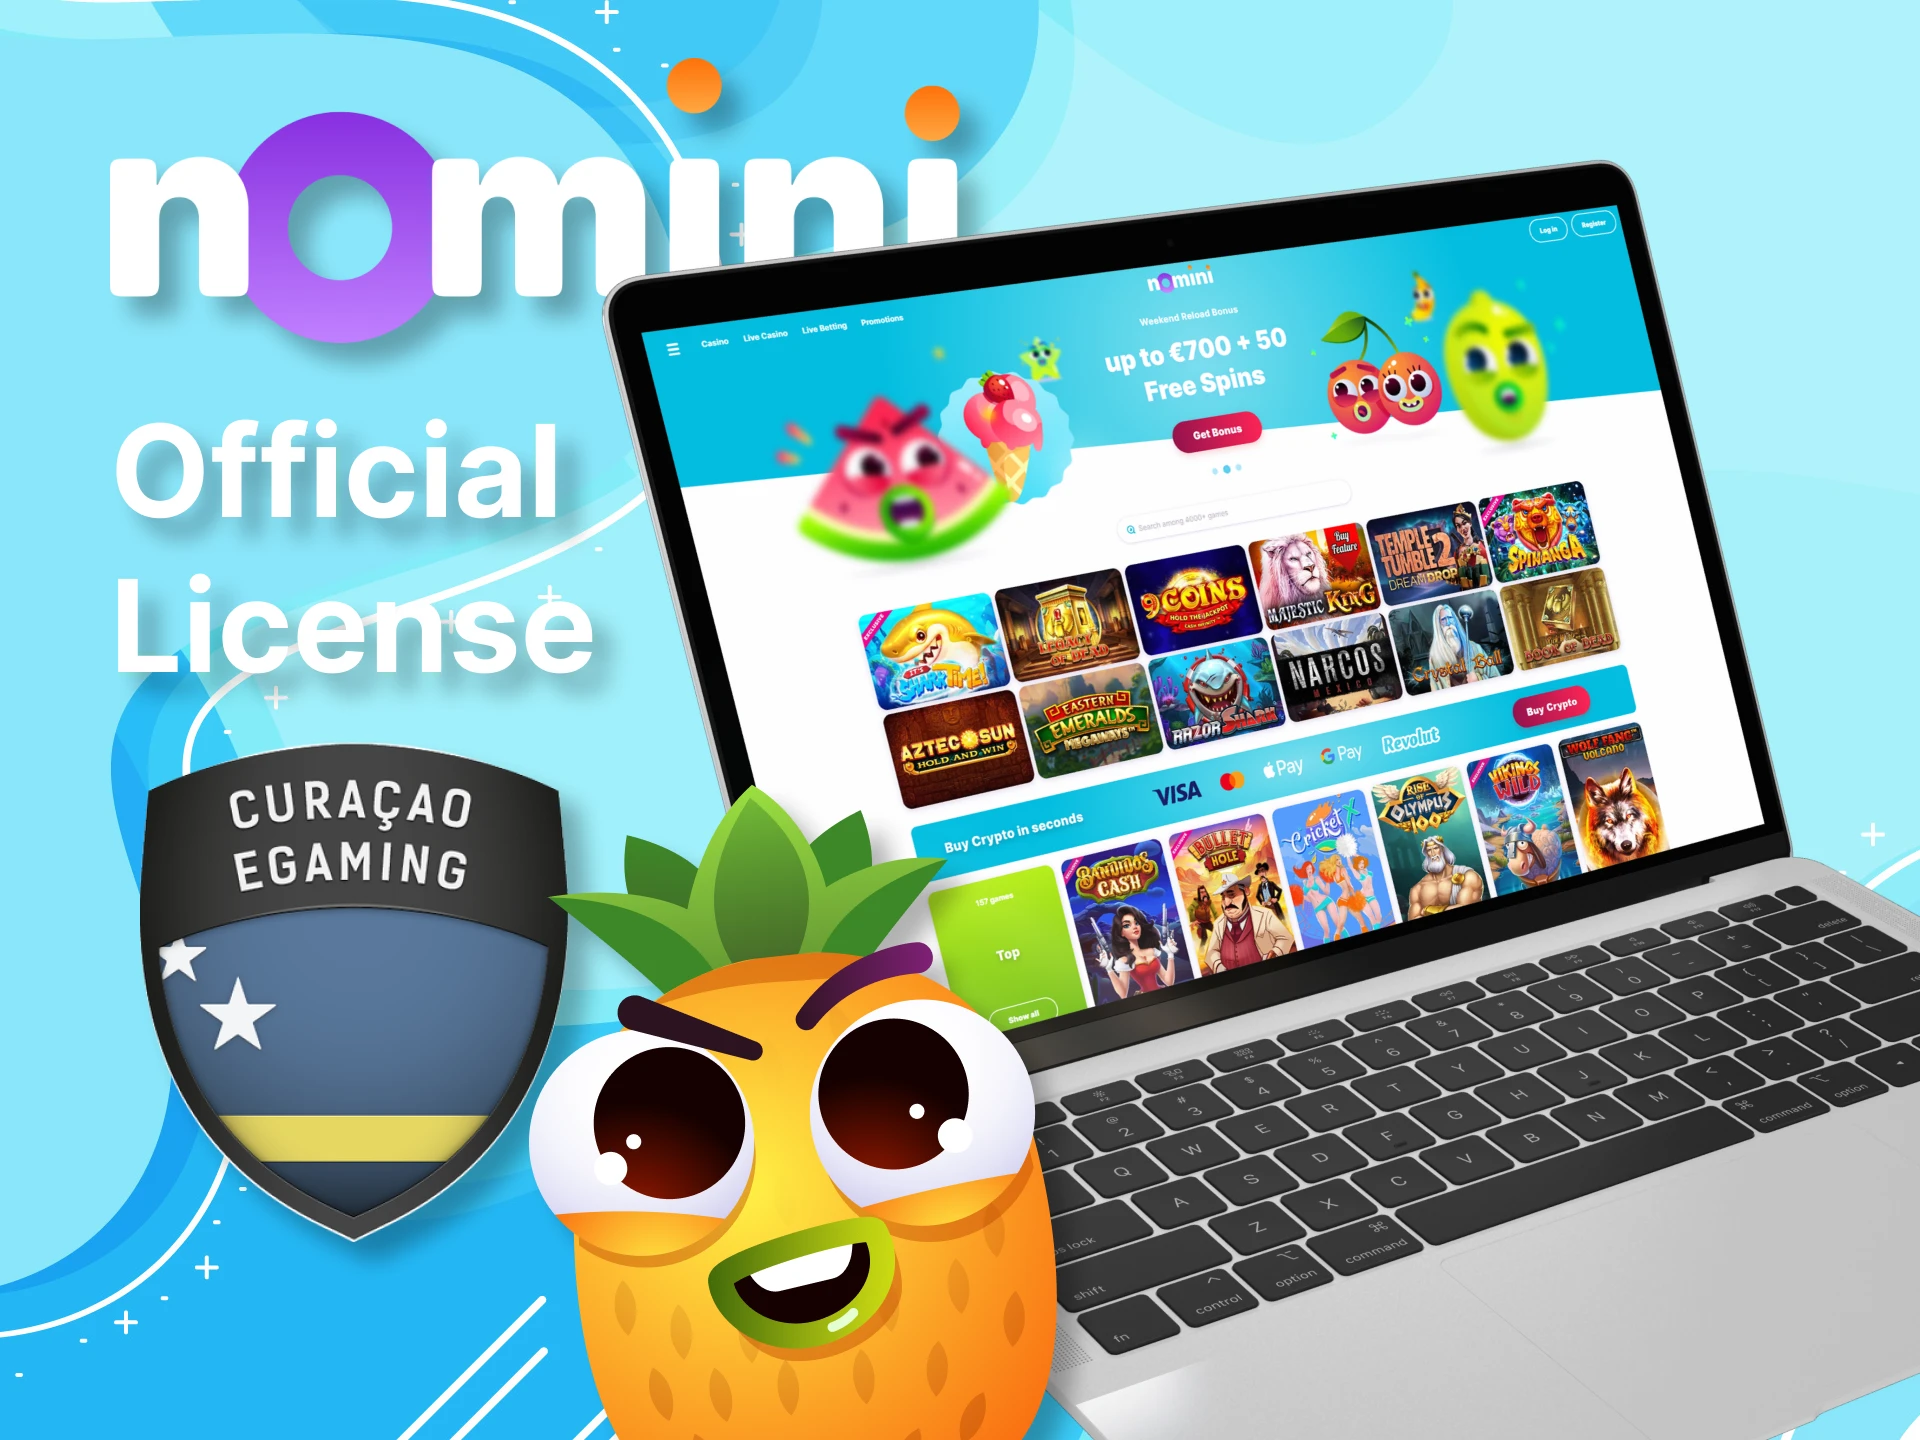 Nomini is officially licensed and safe for players.